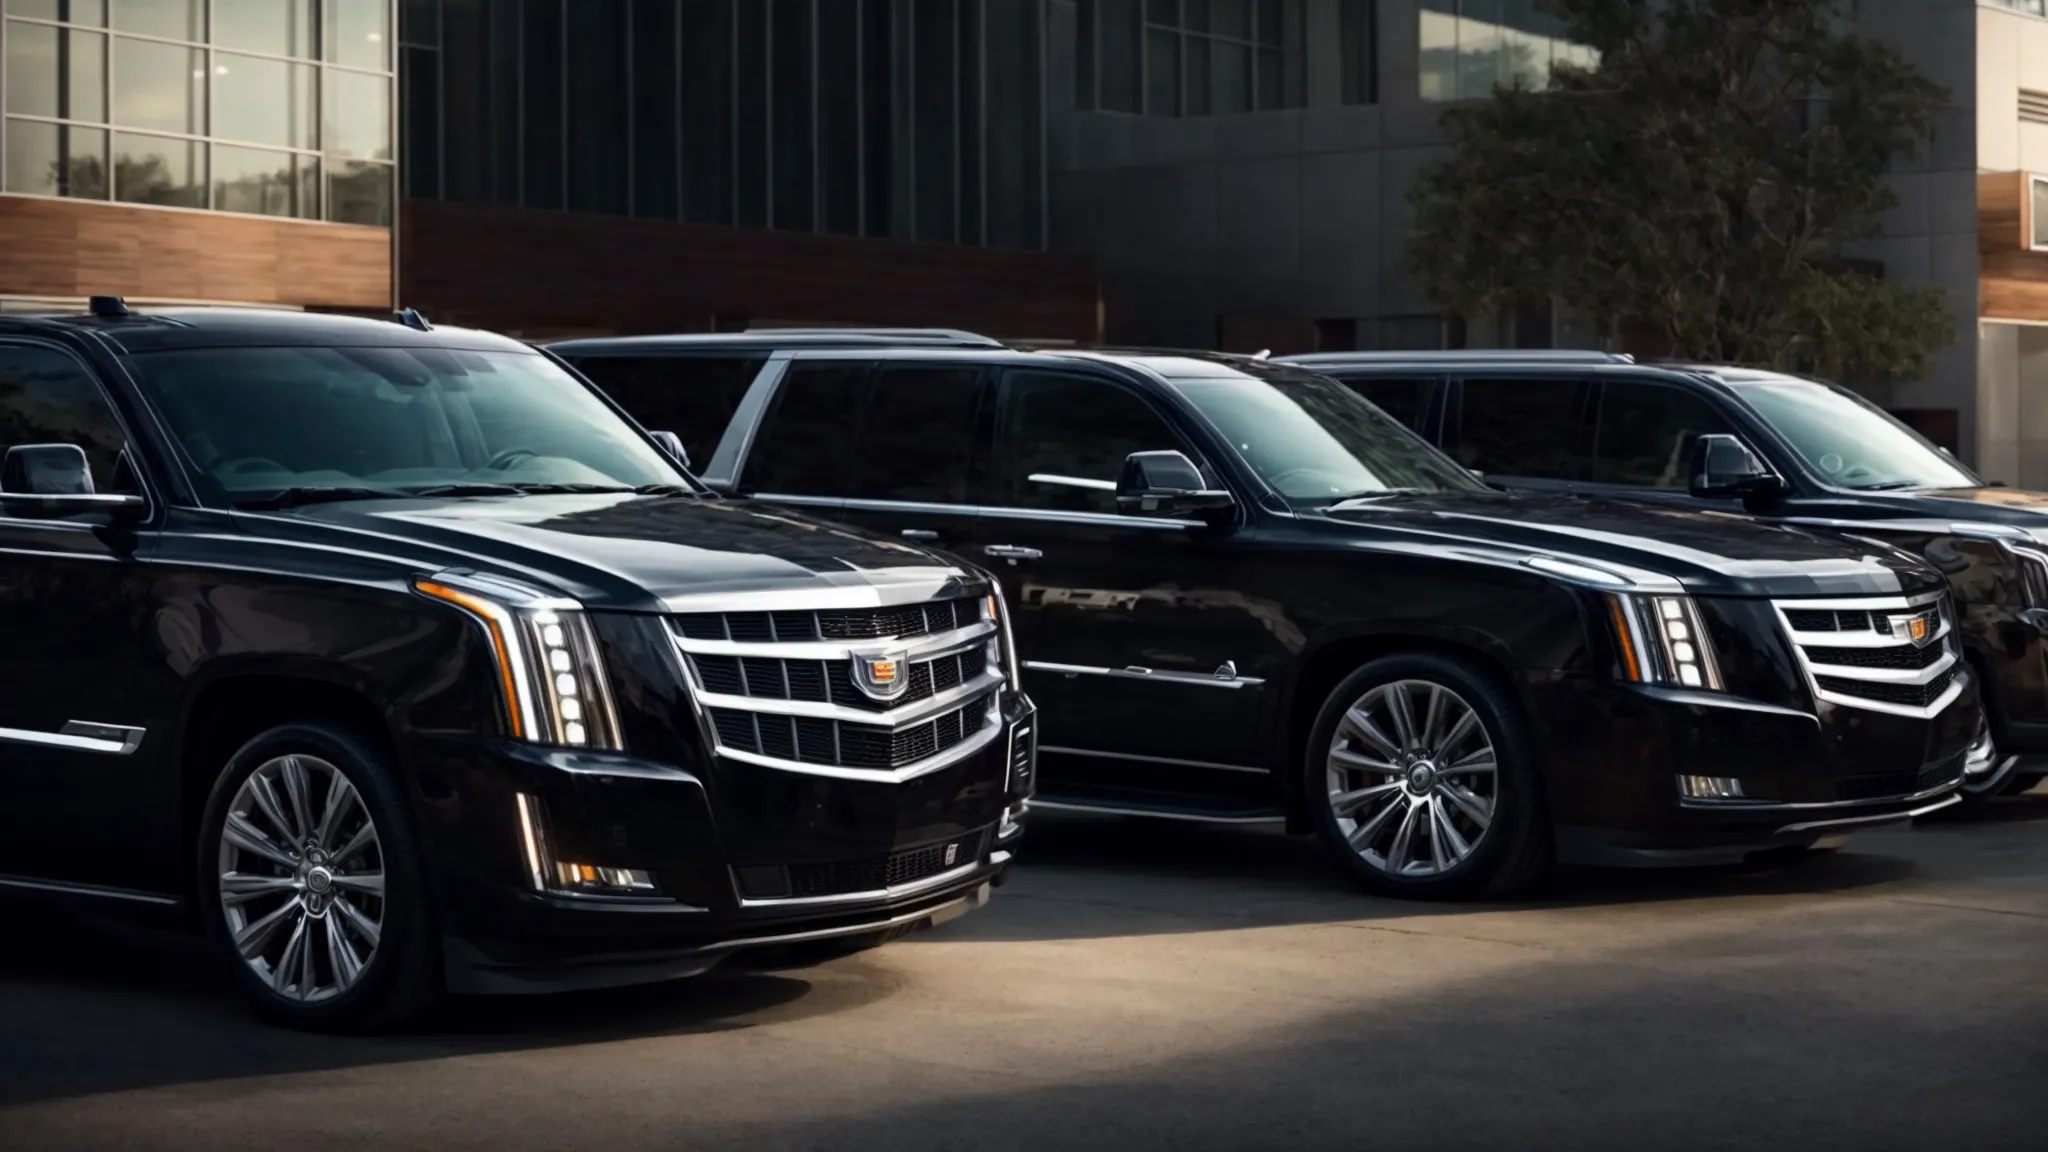 a line of polished luxury cars including a shiny cadillac escalade and sleek sedans, parked side by side, ready to provide exclusive journeys.